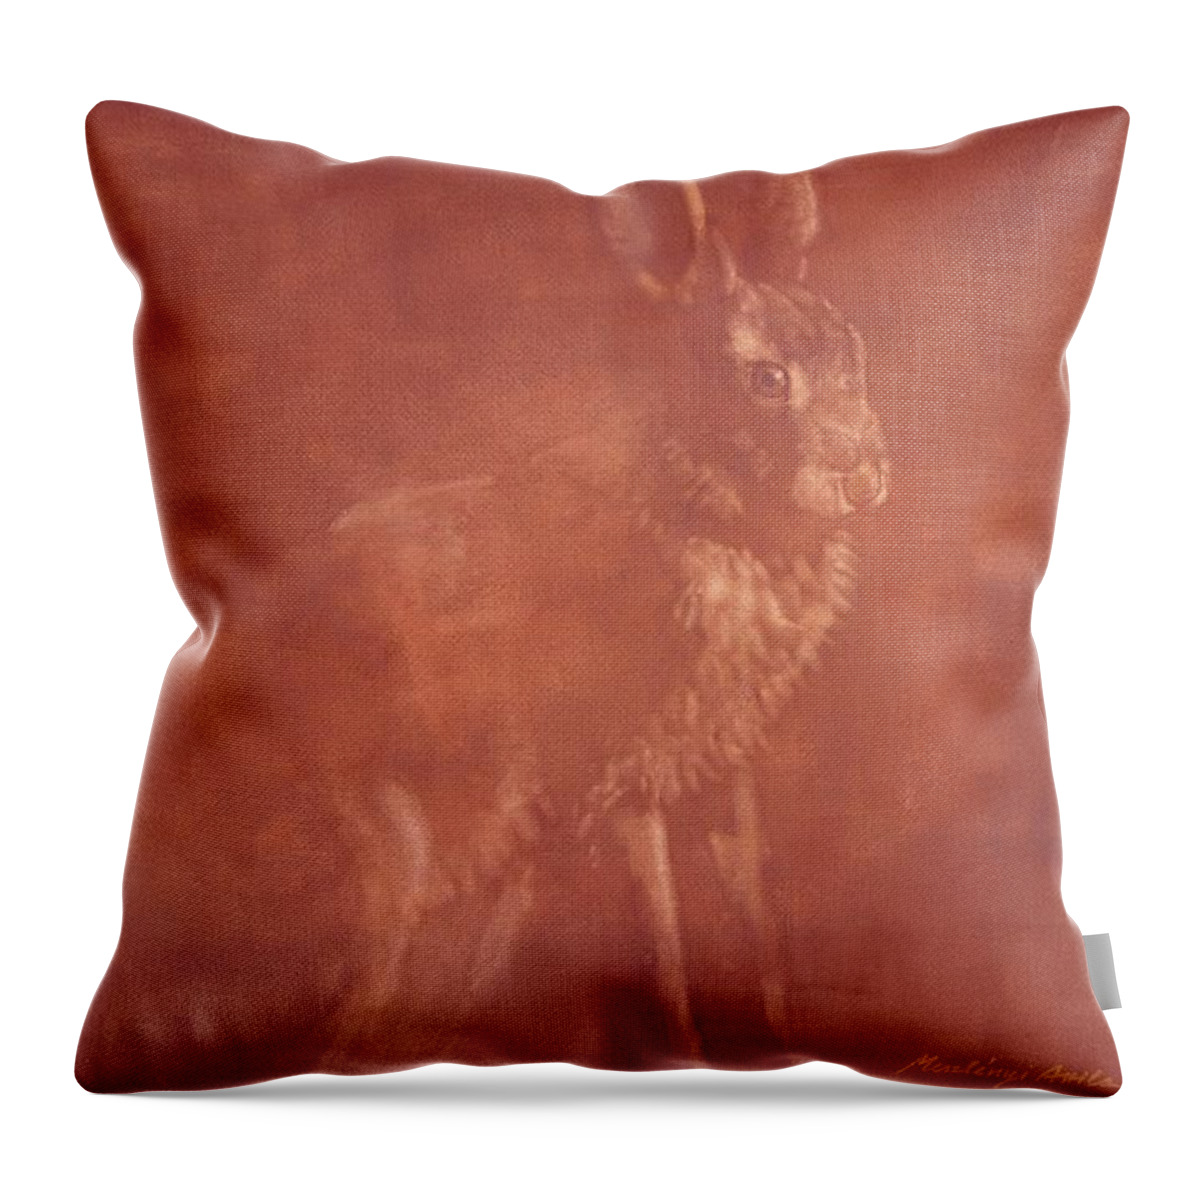 Hare Throw Pillow featuring the painting Sitting Hare by Attila Meszlenyi